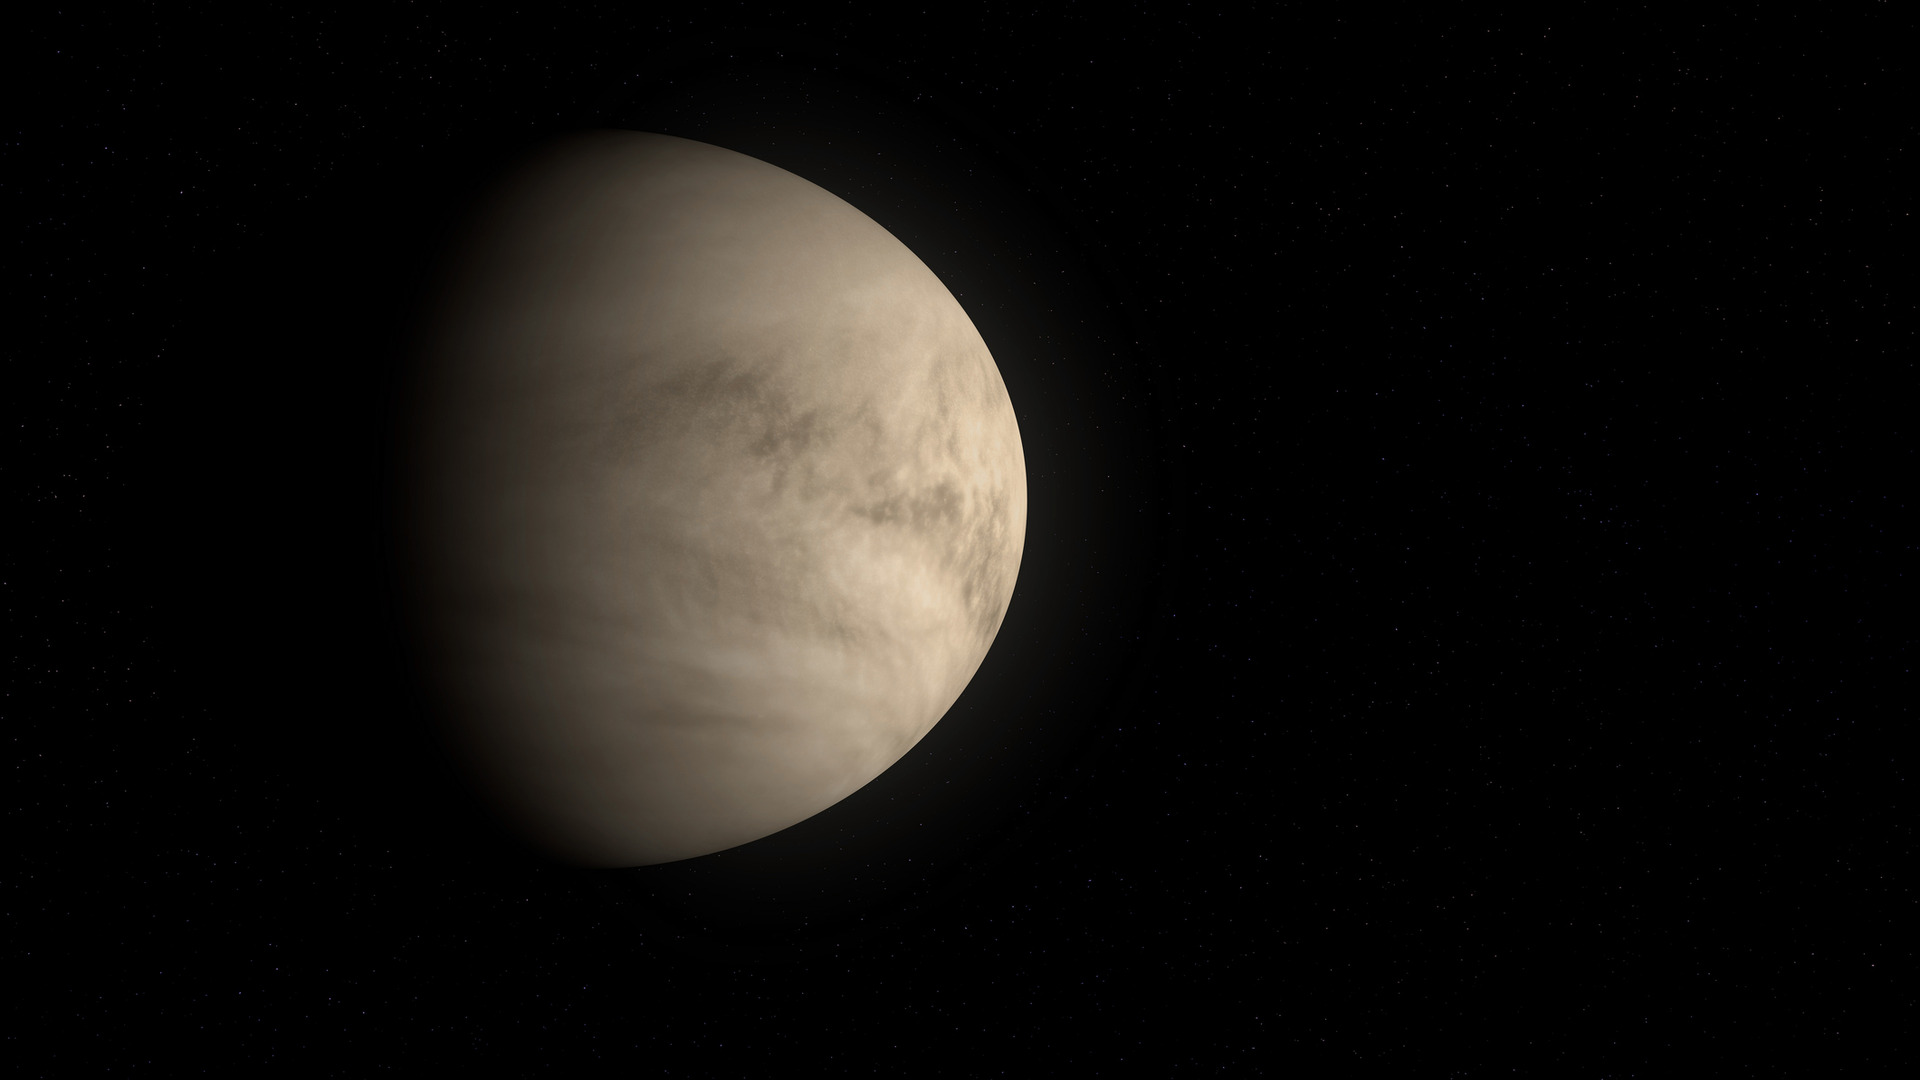 Venus is waterless due to greenhouse effect, indicating Earth’s future [Video]